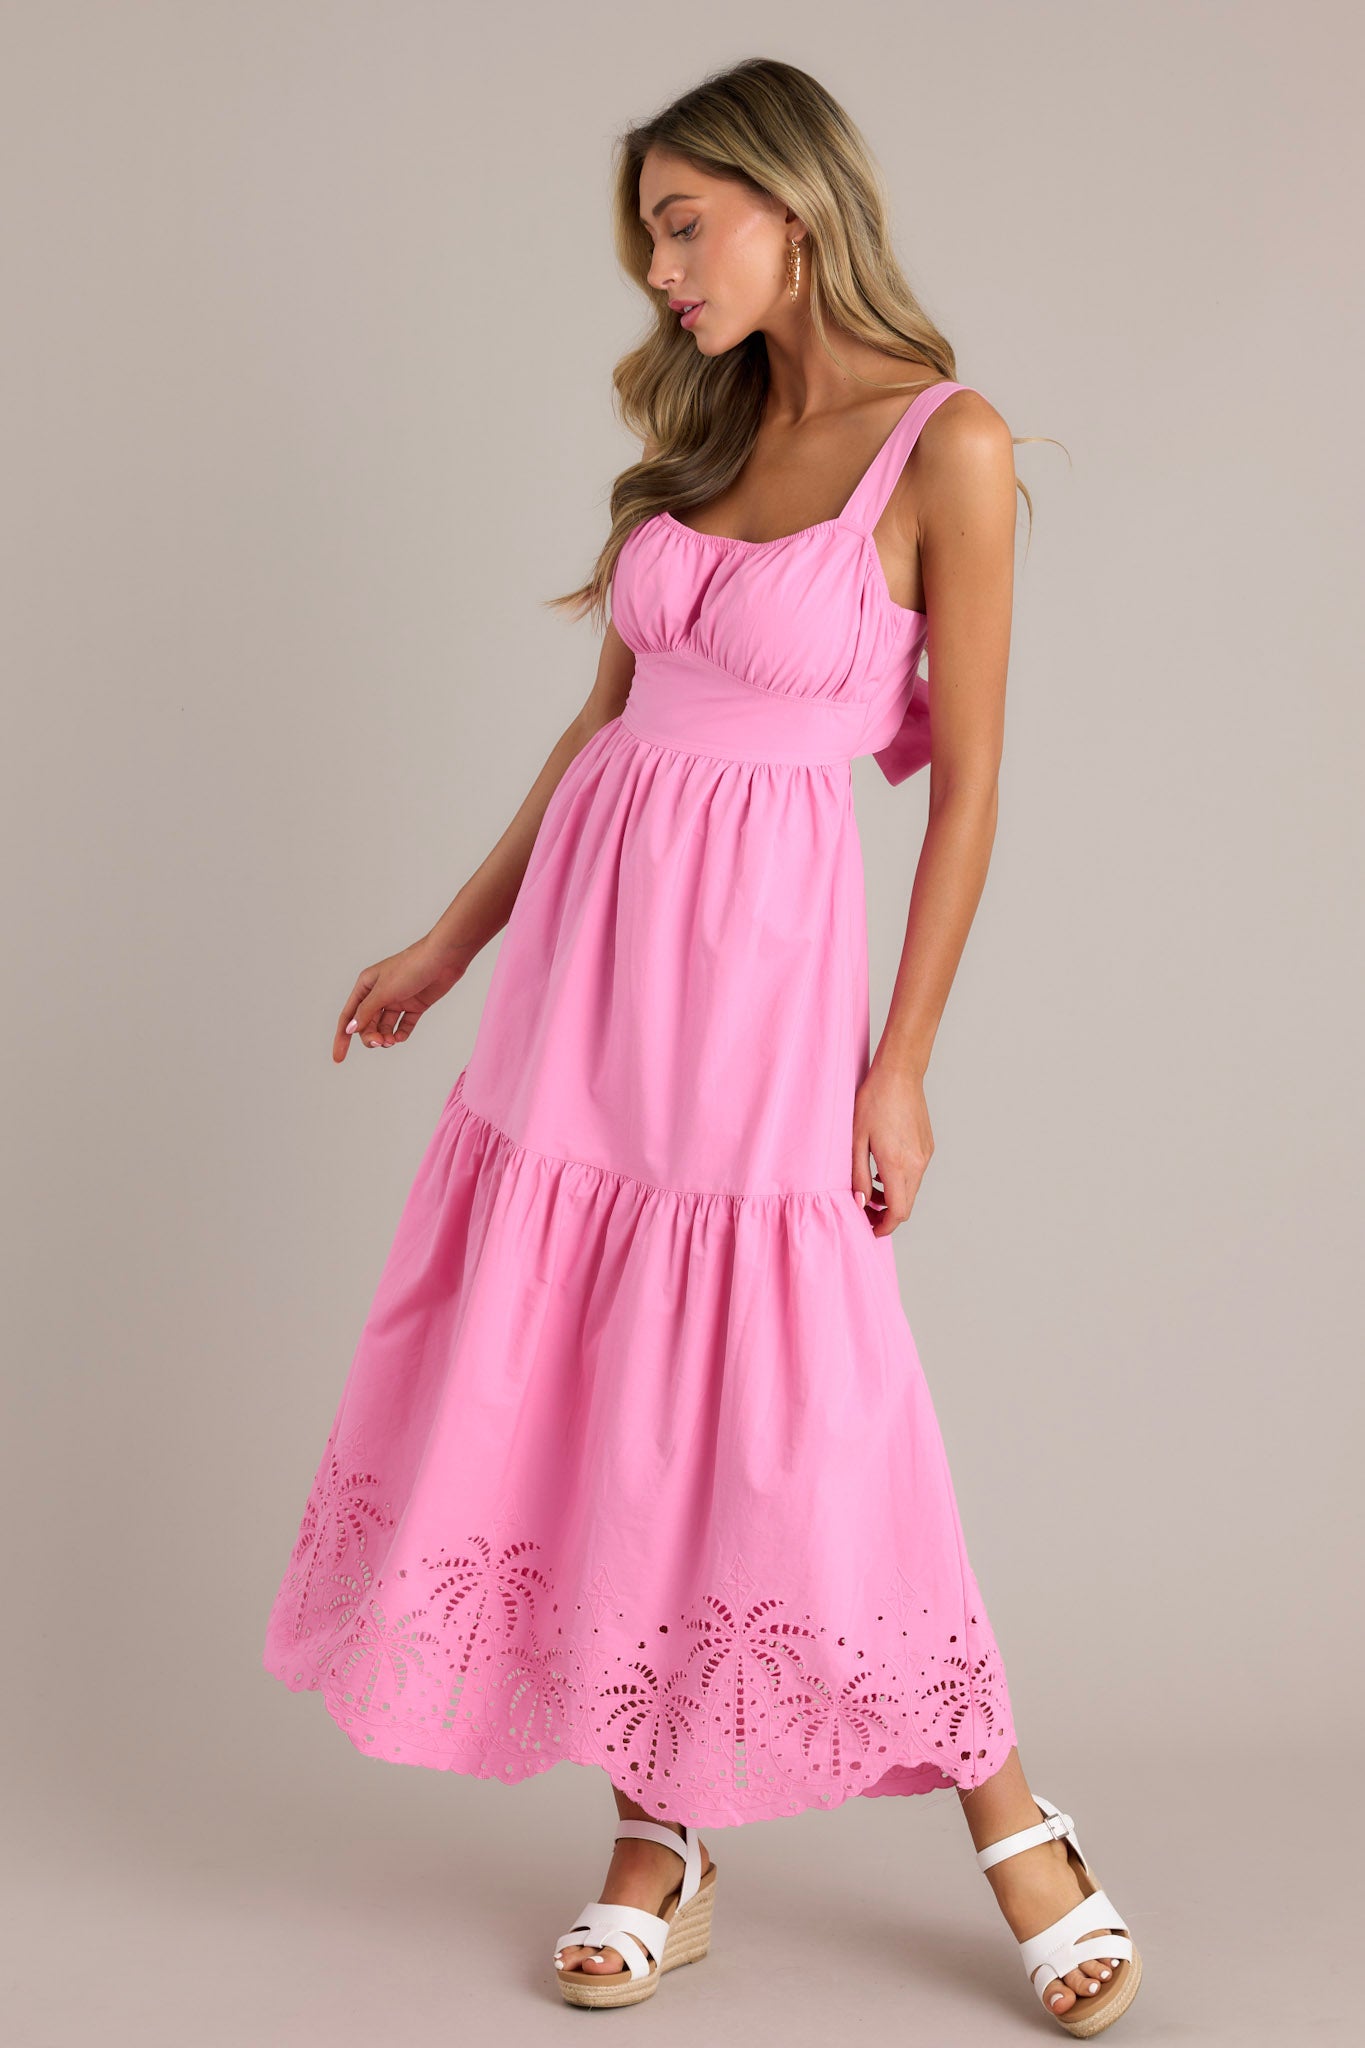 Action shot of a pink midi dress displaying the flow and movement of the fabric, highlighting the elastic square neckline, thick adjustable straps, thick waistband with a self-tie back feature, open lower back, and the palm eyelet detailing on the scalloped hemline.